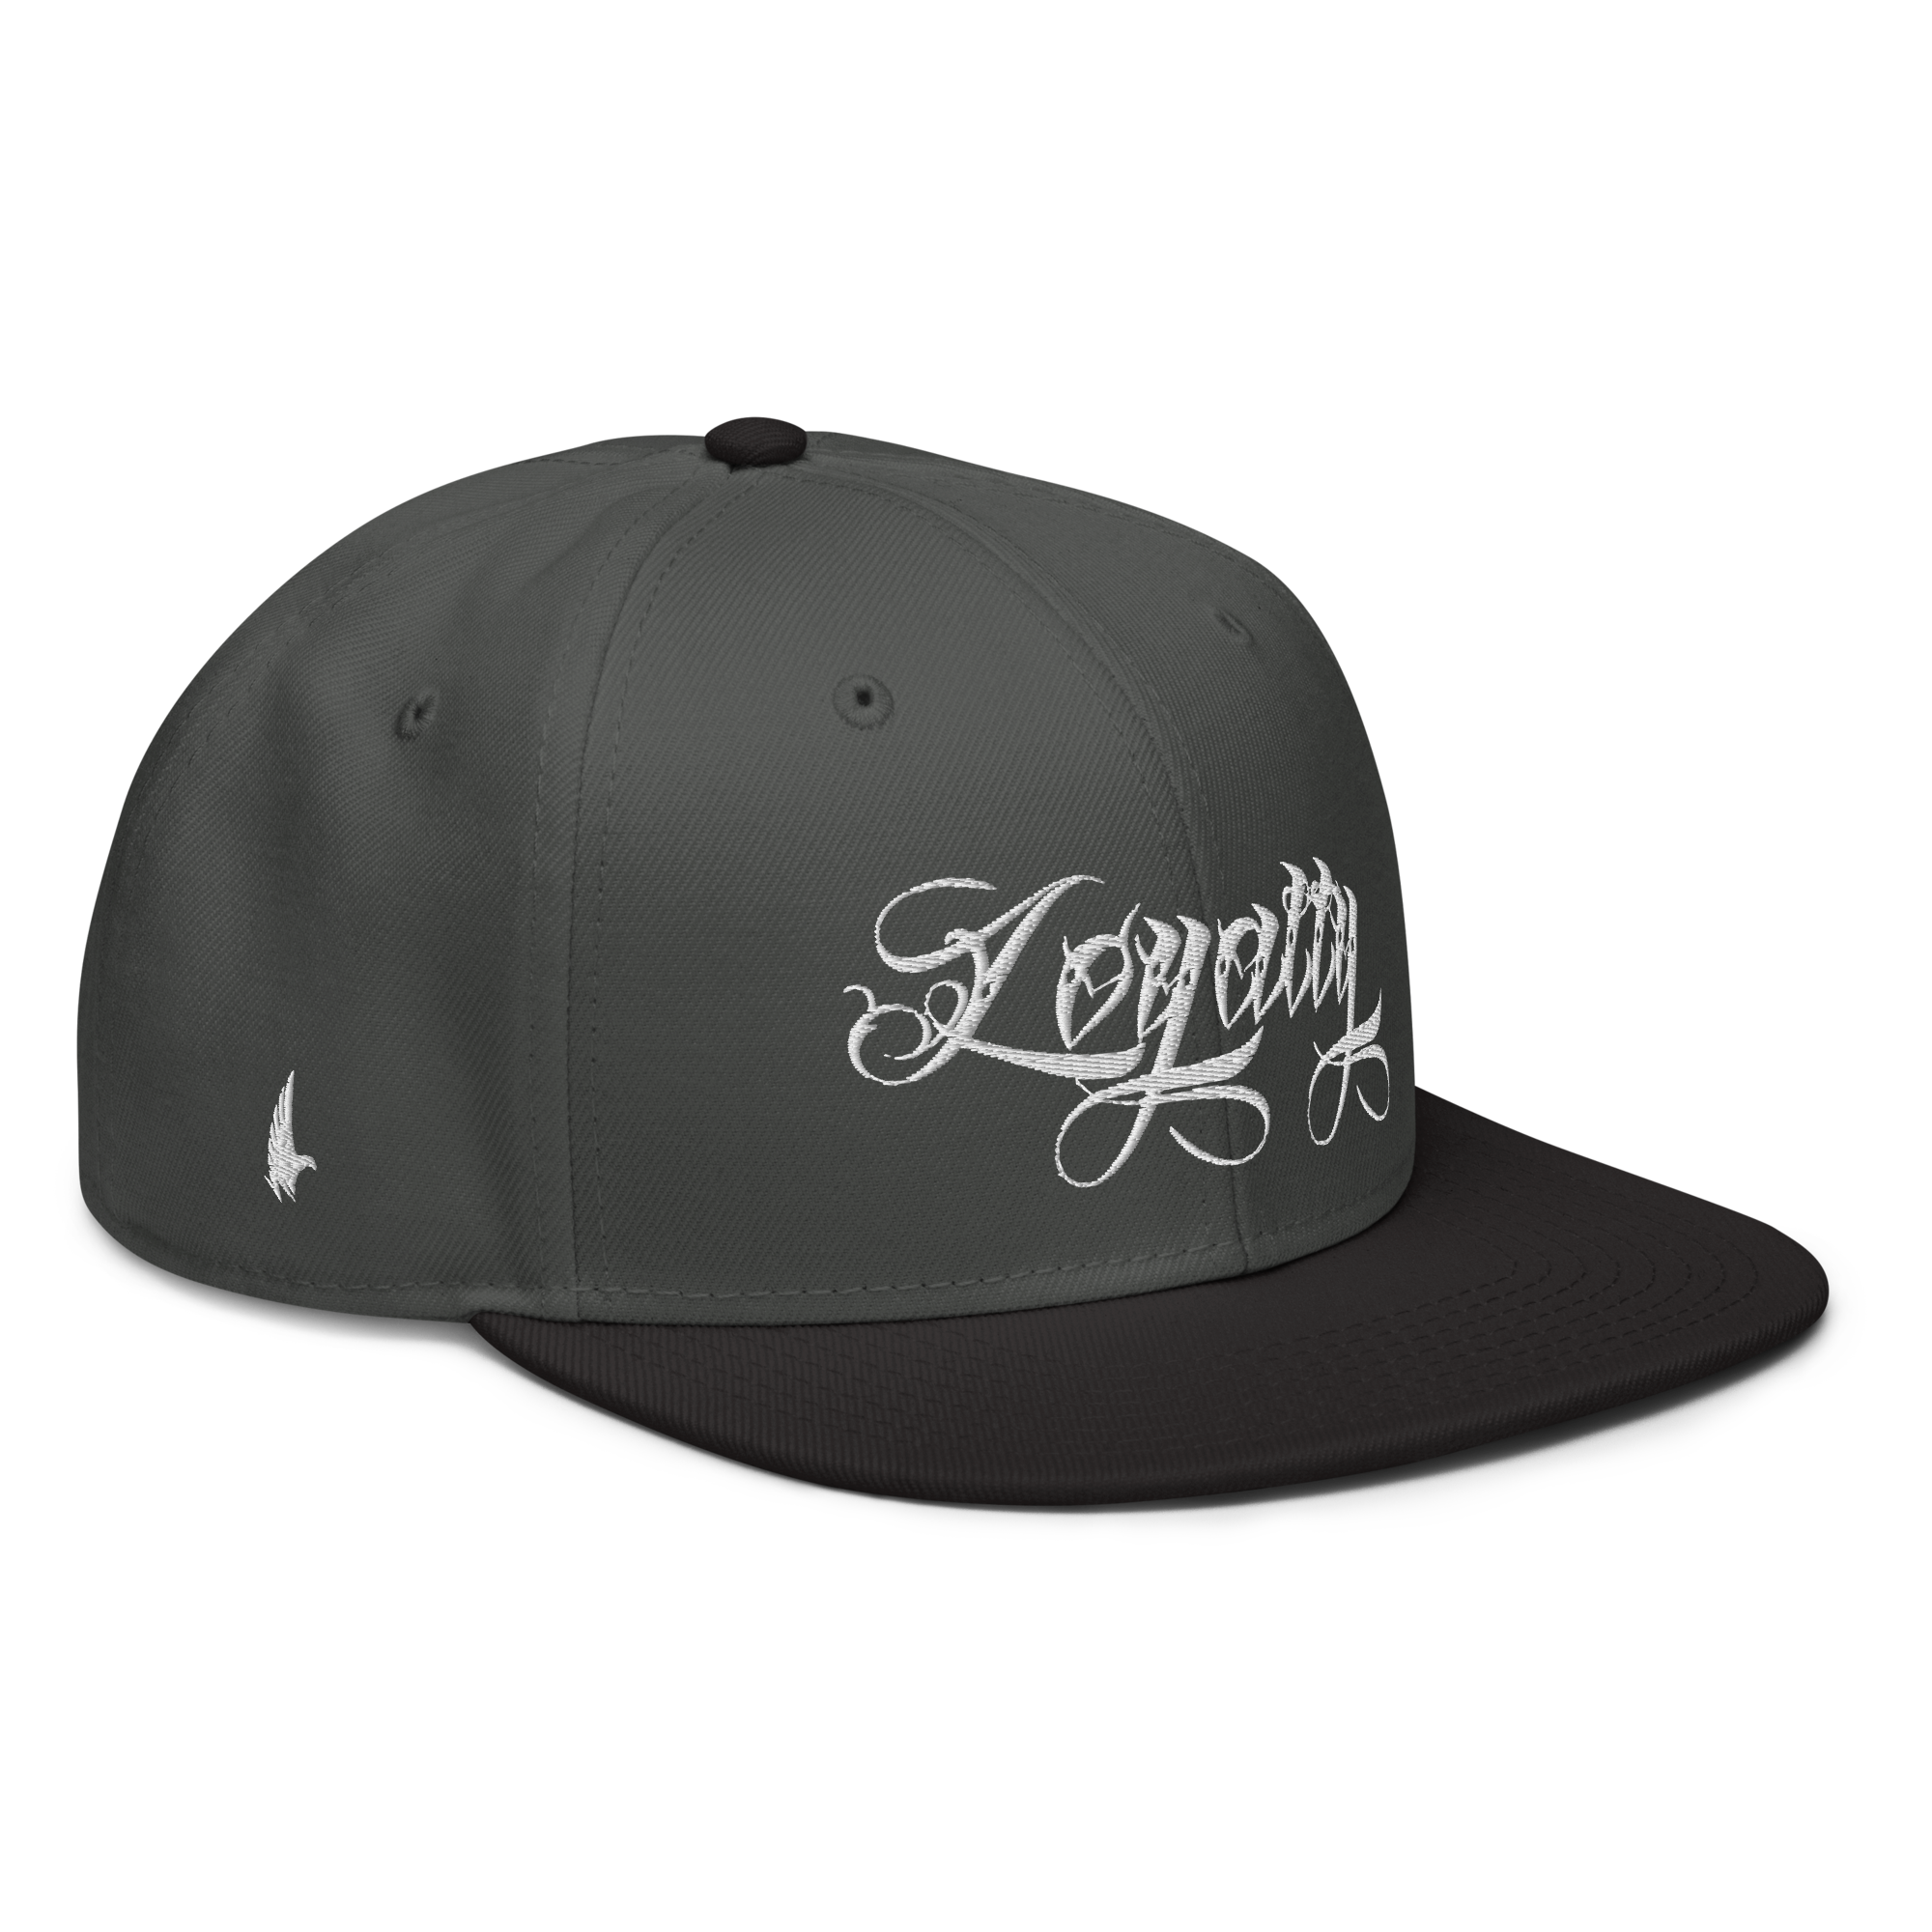 Loyalty Ice Snapback Hat - Charcoal Gray / White / Black OS - Loyalty Vibes